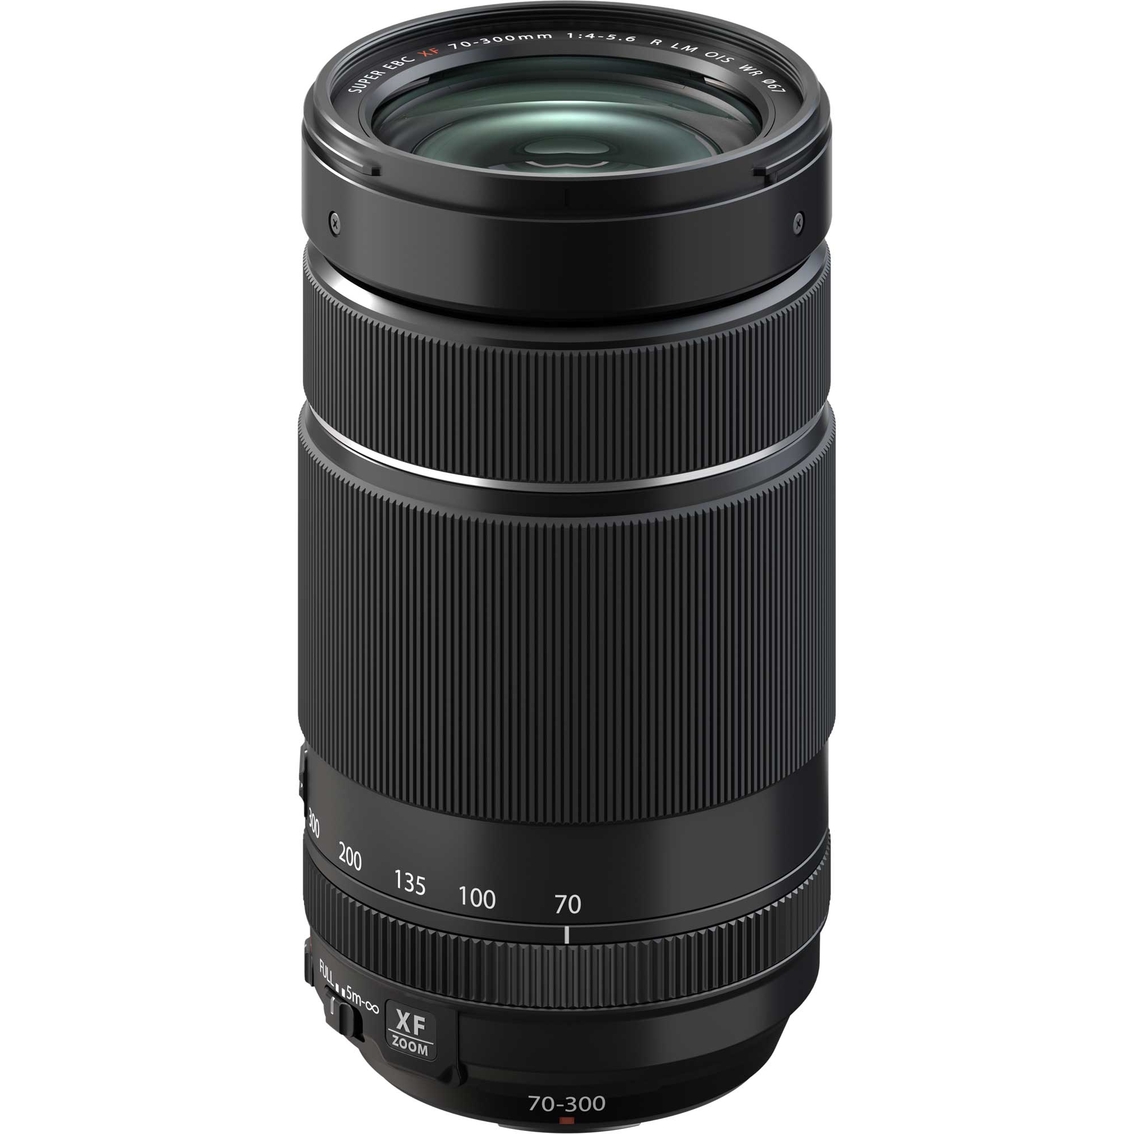 Fujinon XF70-300mmF4-5.6 R LM OIS WR Lens - Image 1 of 2